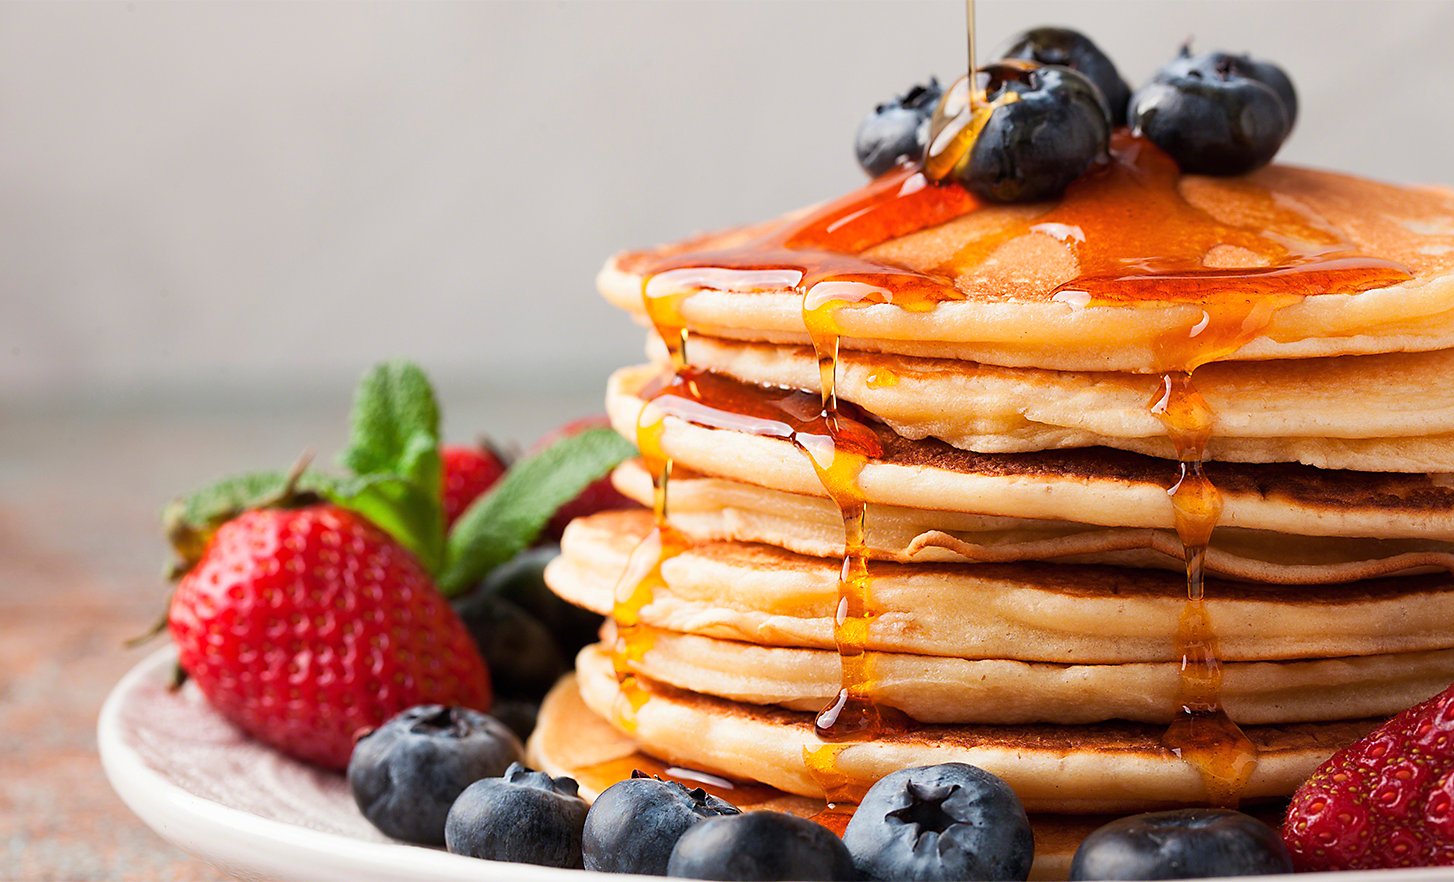 A stack of pancakes topped with berries and maple syrup